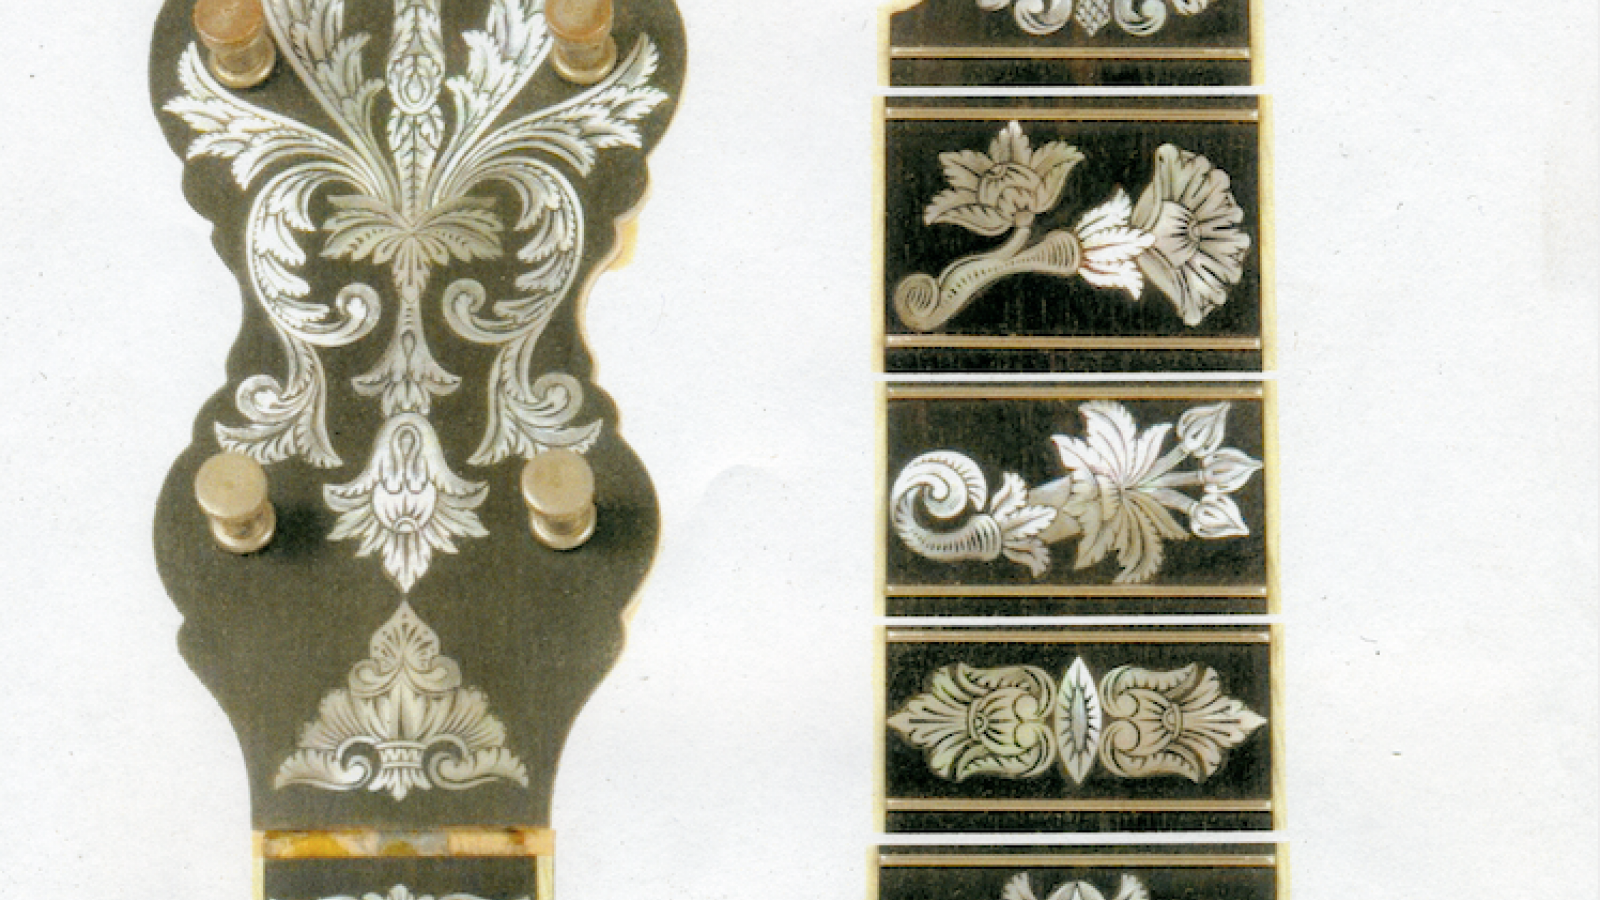 Engravings on the neck of a banjo